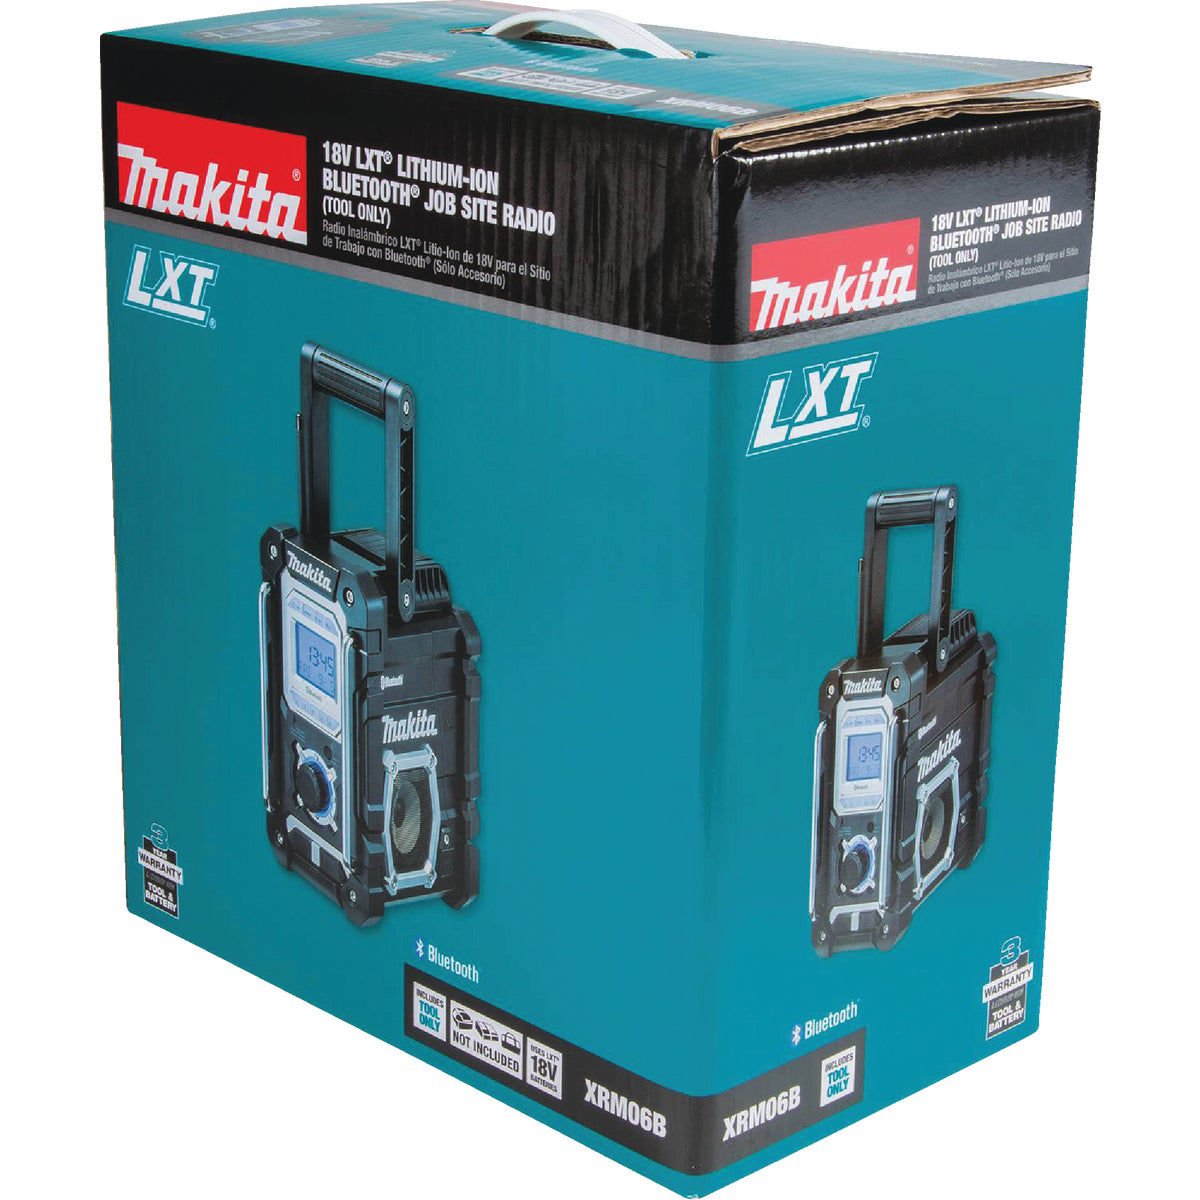 Get a free Bluetooth Job Site Radio with Makita's latest promo - PHPI Online